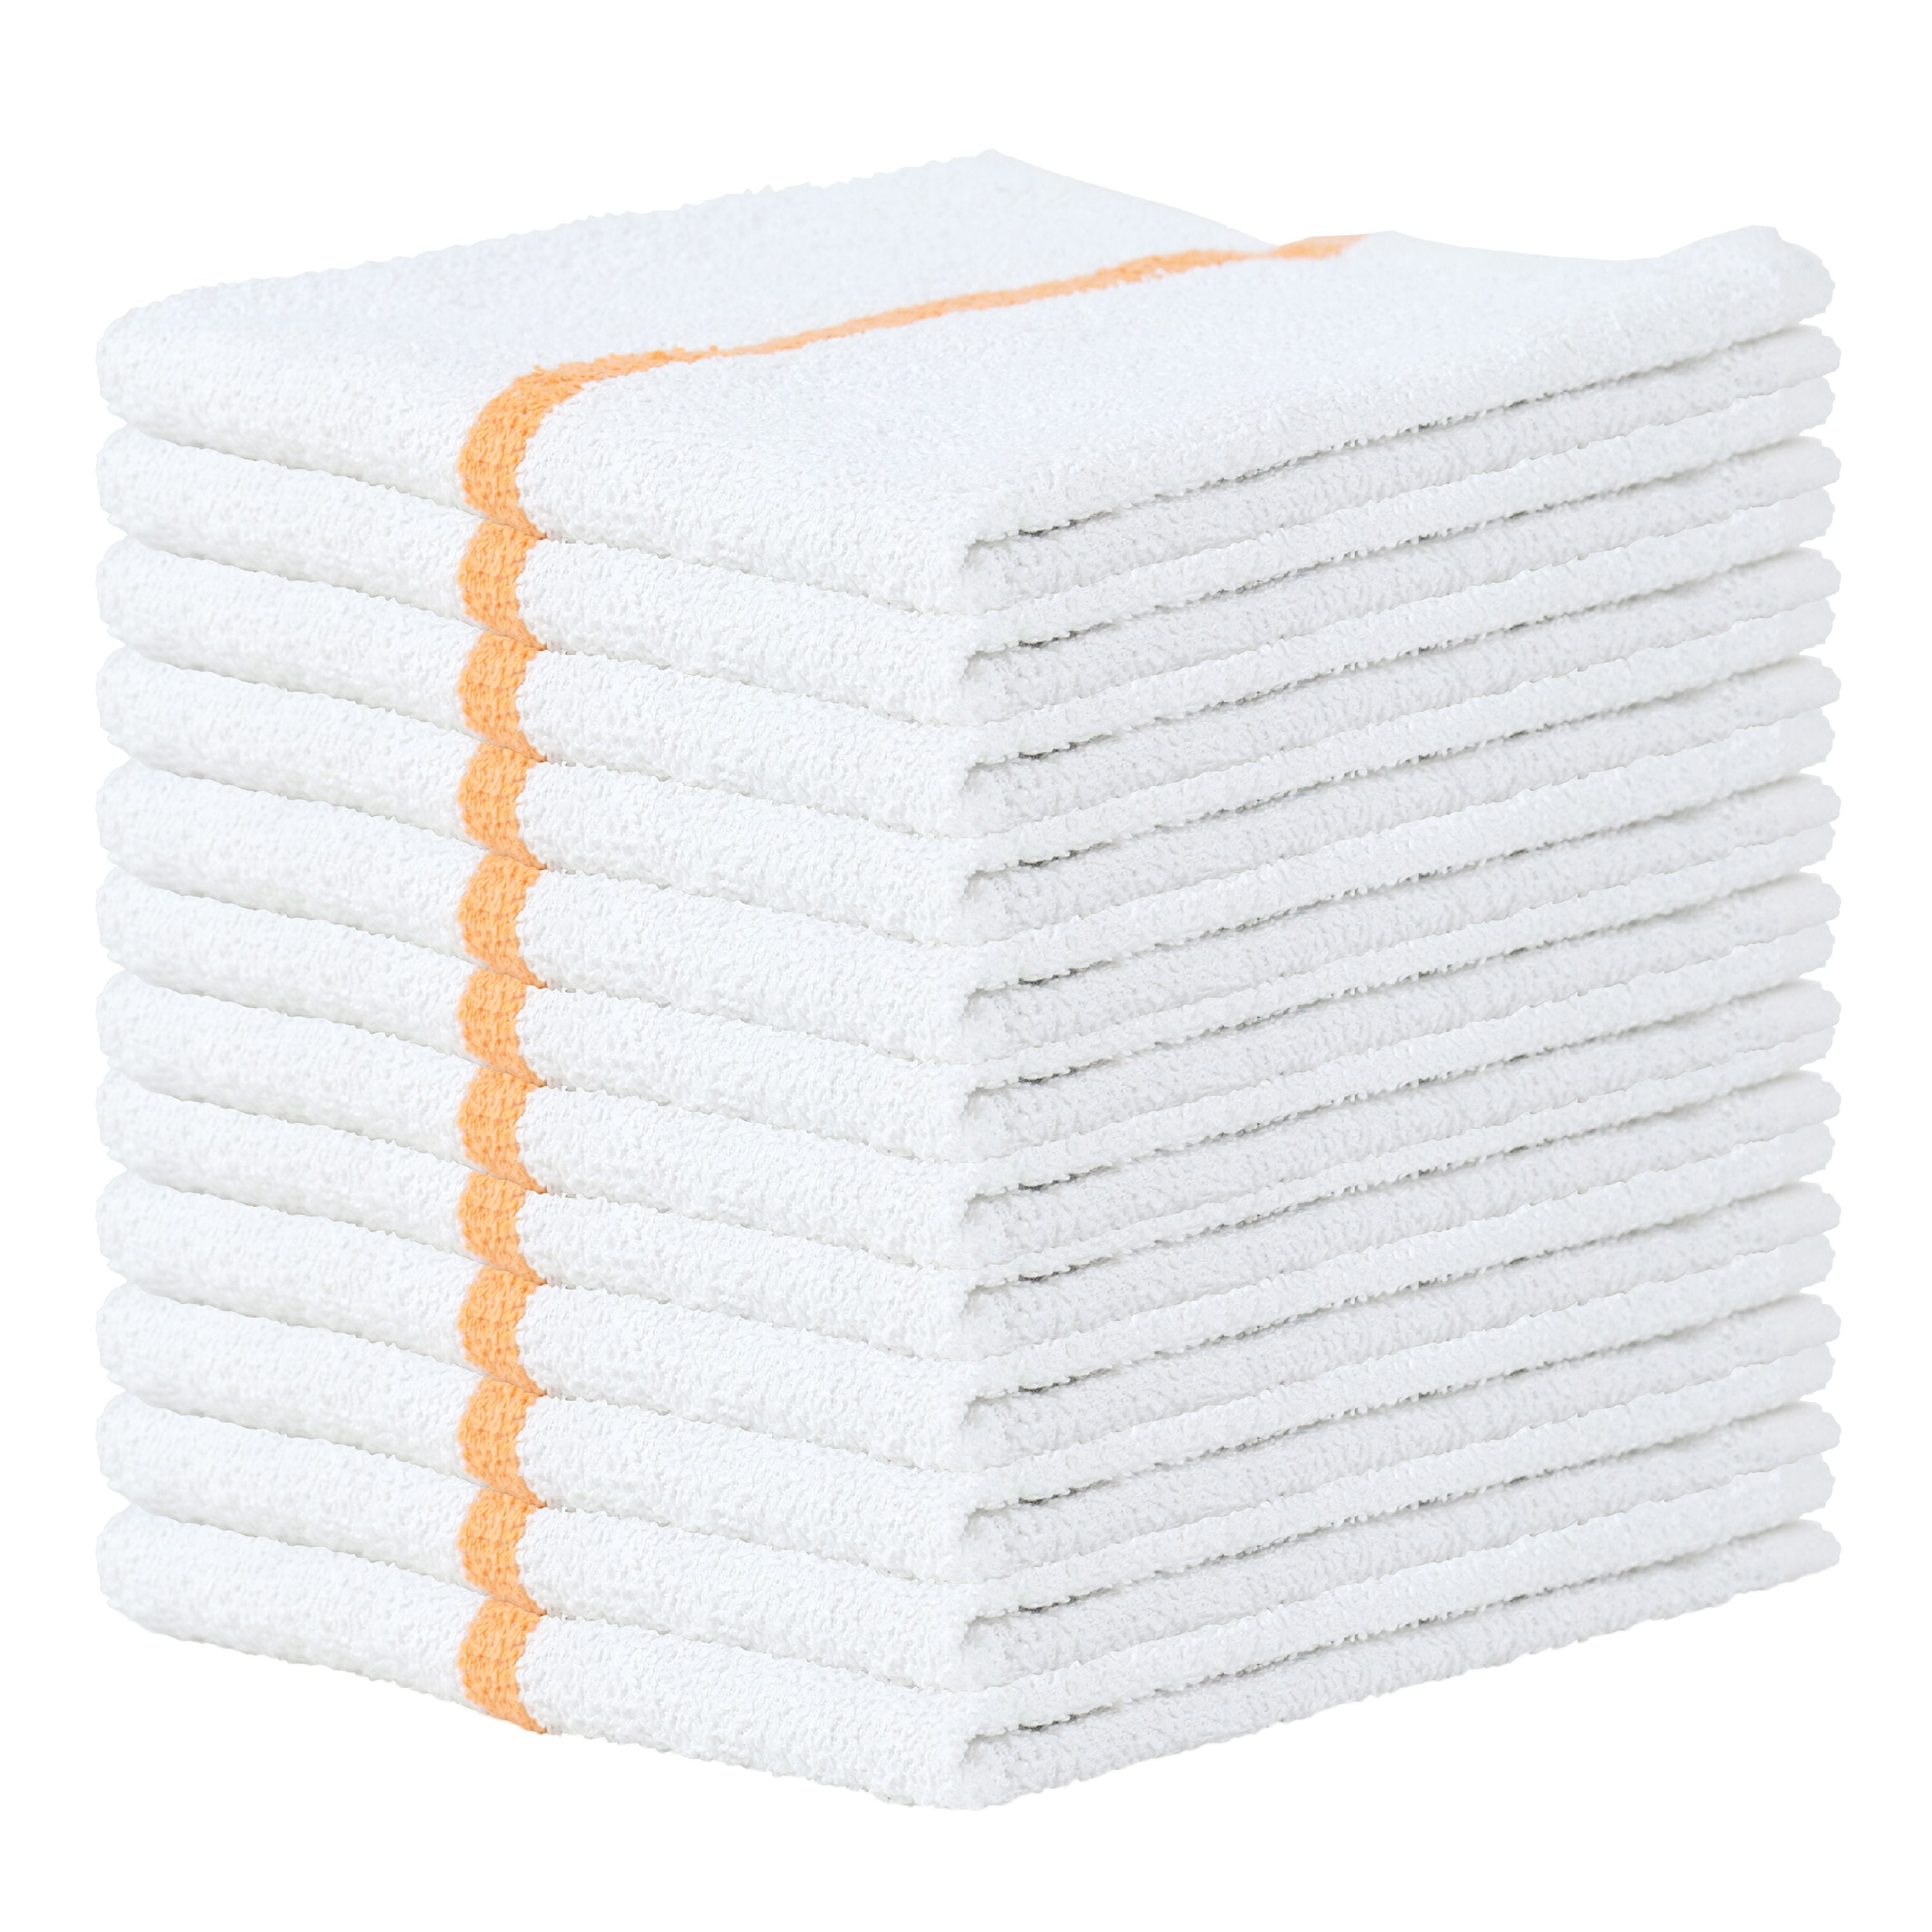 TALVANIA Bar Mop Towels 16”x19”, White Kitchen Bar Towel 12 Pack, 100%  Cotton Ribbed Cleaning Cloths Rags, Super Absorbent Terry Shop Towels for  Home